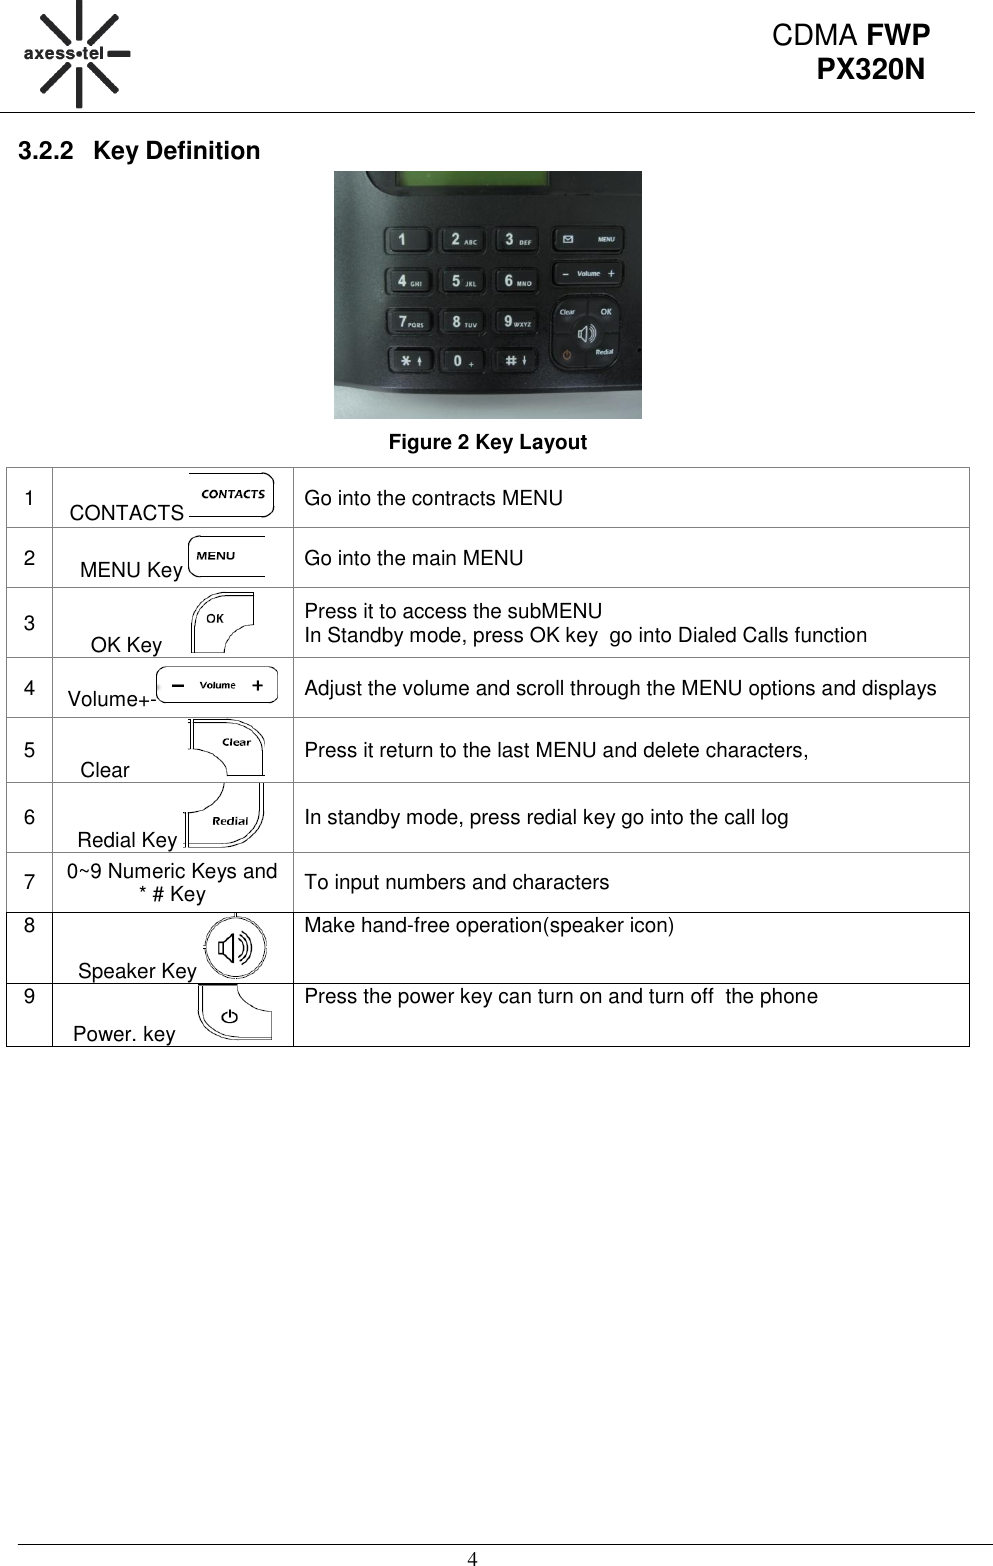                                                                                                      4 CDMA FWP PX320N 3.2.2  Key Definition  Figure 2 Key Layout 1 CONTACTS   Go into the contracts MENU 2 MENU Key   Go into the main MENU 3 OK Key      Press it to access the subMENU In Standby mode, press OK key  go into Dialed Calls function 4 Volume+-  Adjust the volume and scroll through the MENU options and displays 5 Clear            Press it return to the last MENU and delete characters, 6 Redial Key   In standby mode, press redial key go into the call log 7 0~9 Numeric Keys and * # Key To input numbers and characters 8 Speaker Key   Make hand-free operation(speaker icon) 9 Power. key    Press the power key can turn on and turn off  the phone   